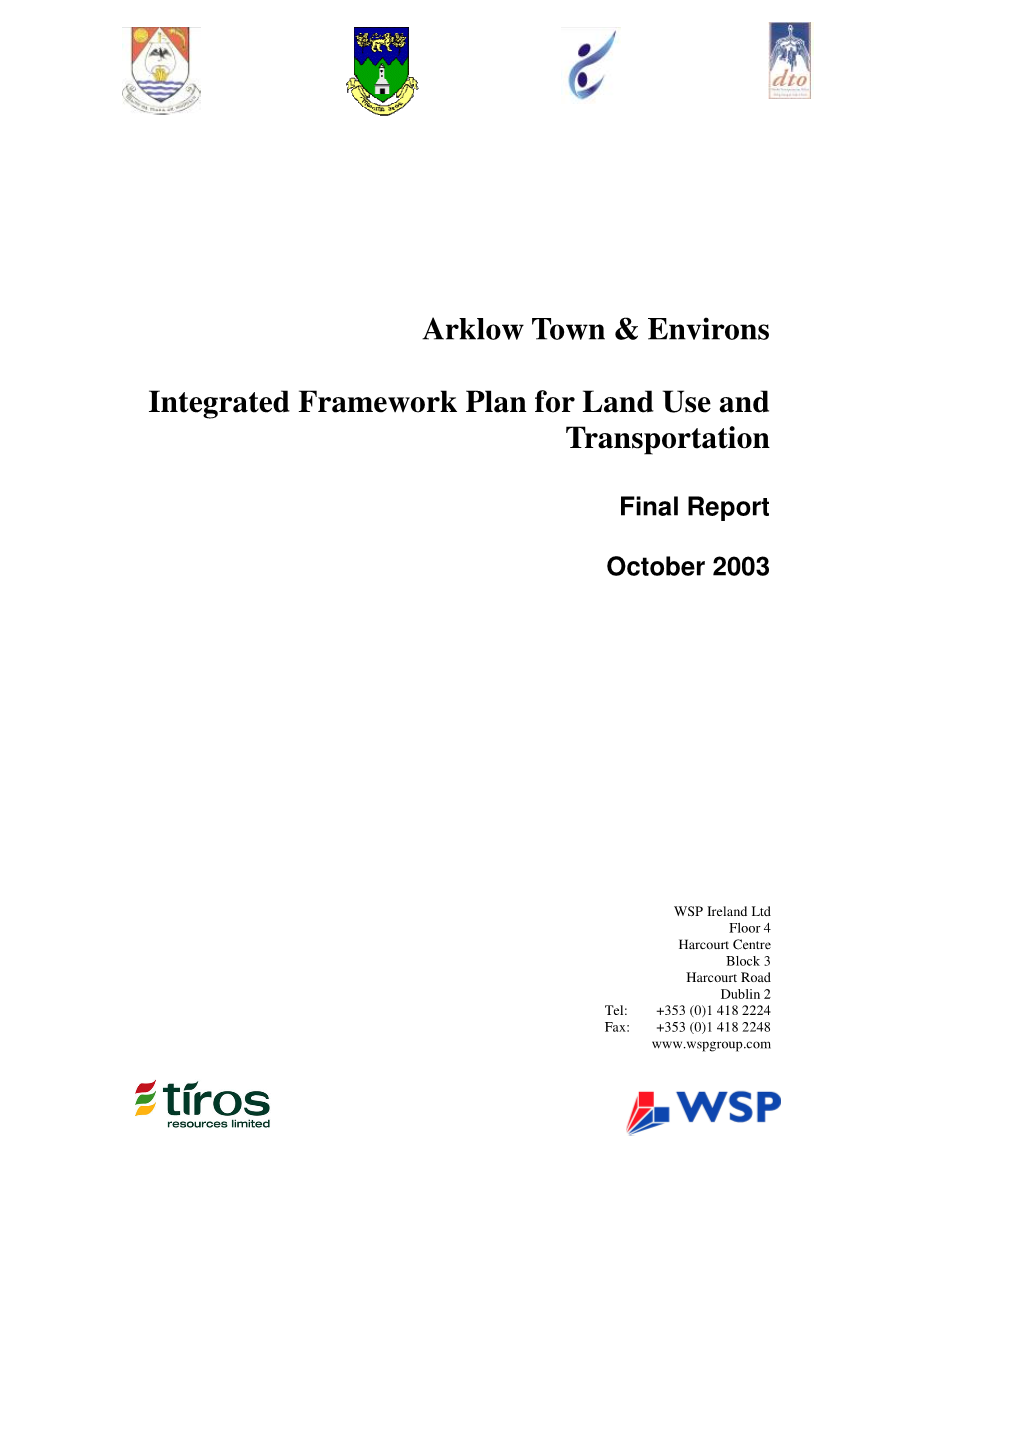 Arklow Town & Environs Integrated Framework Plan for Land Use And